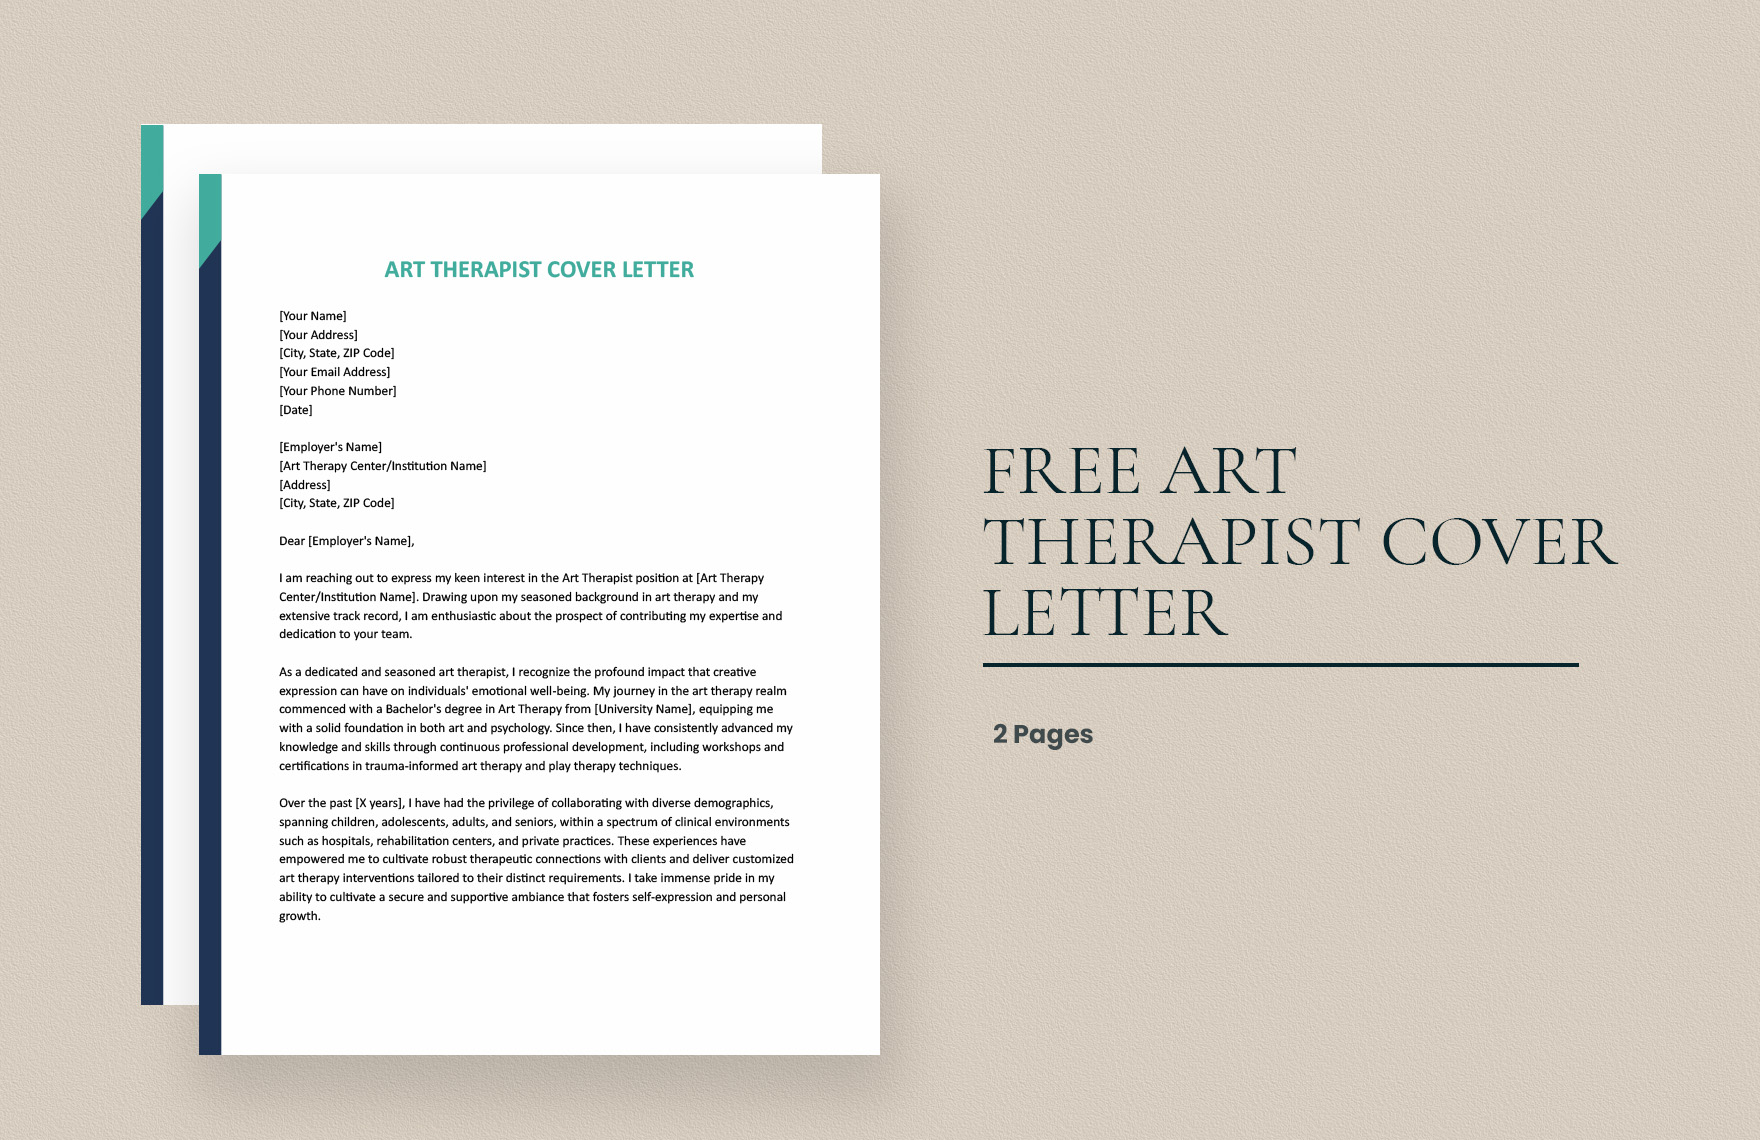 Free Art Therapist Cover Letter - Download in Word, Google Docs ...